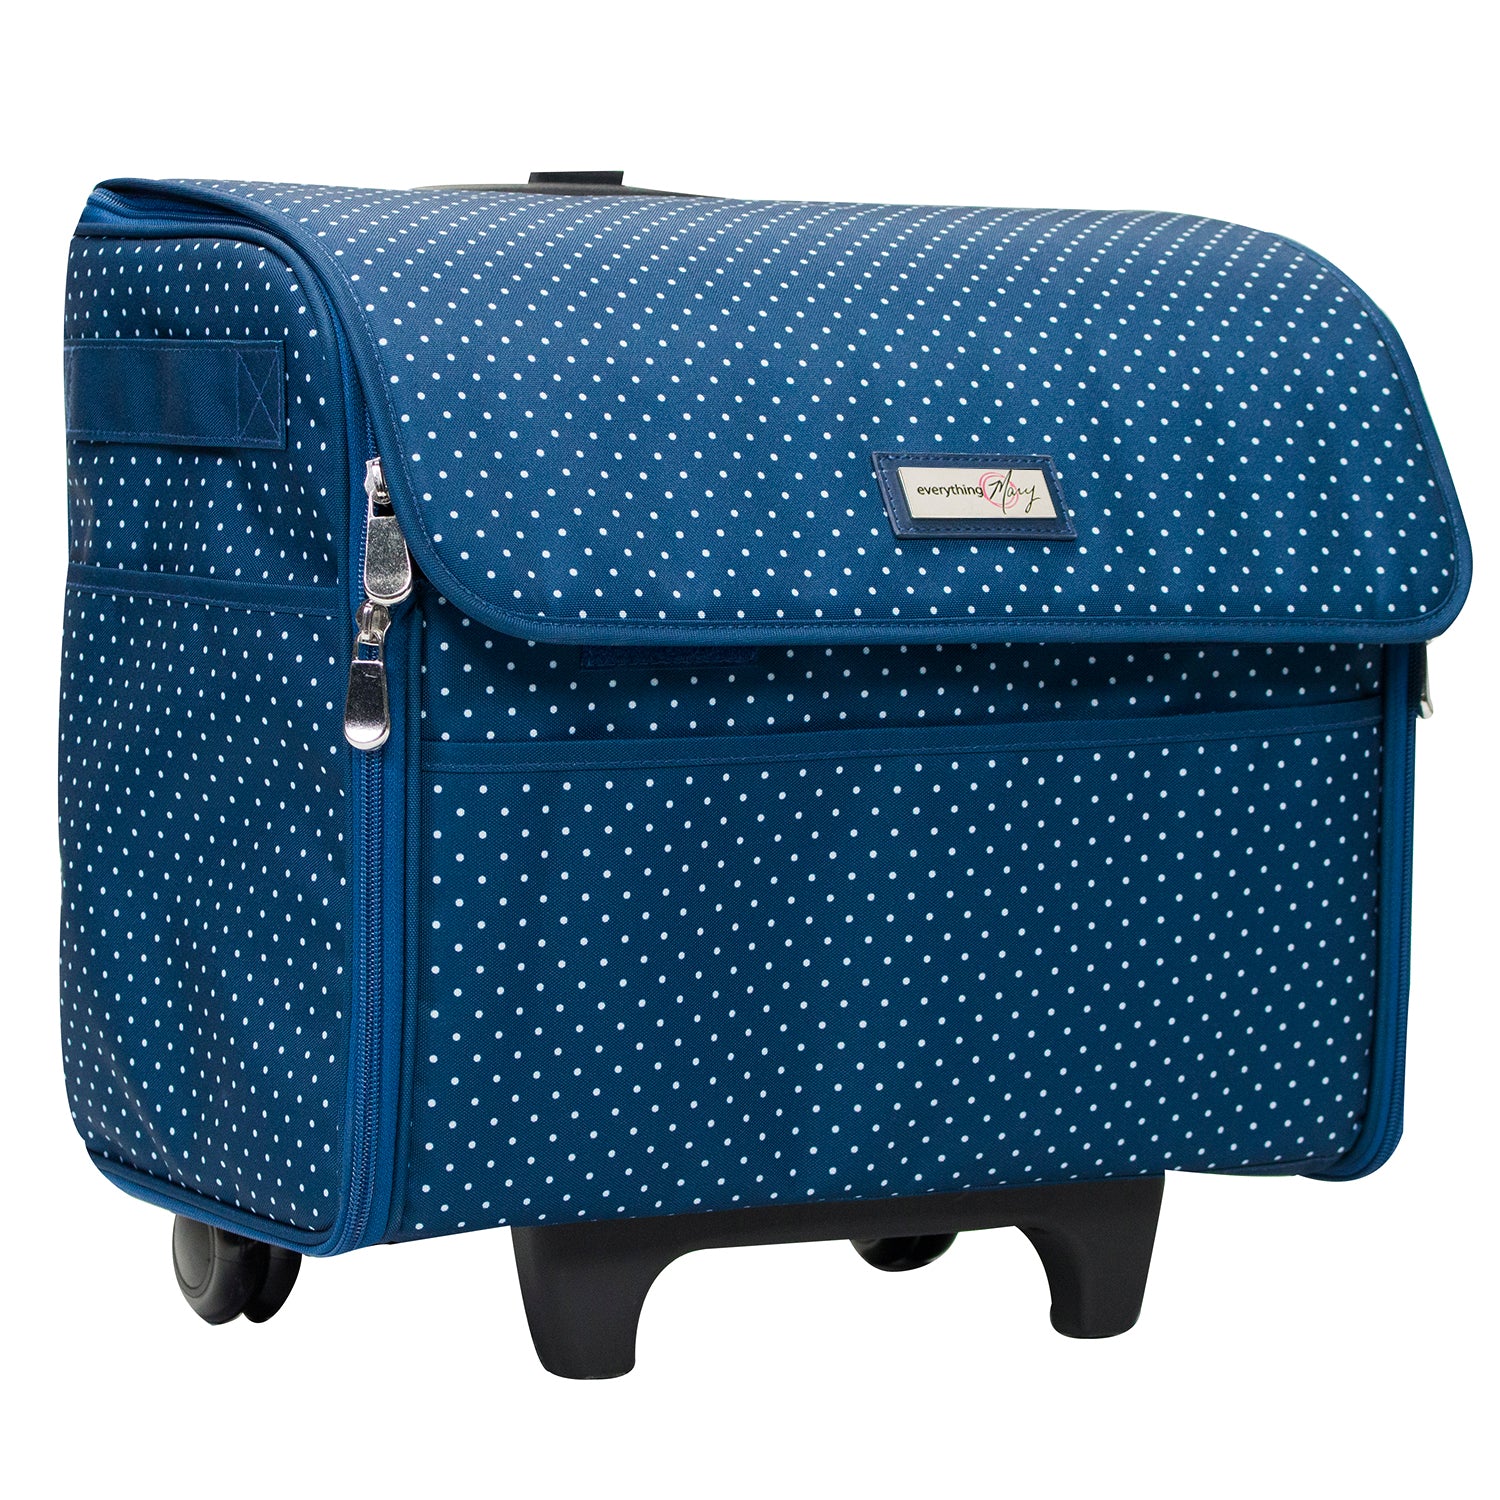 Everything Mary Deluxe Blue Sewing Machine Carrying Storage Case